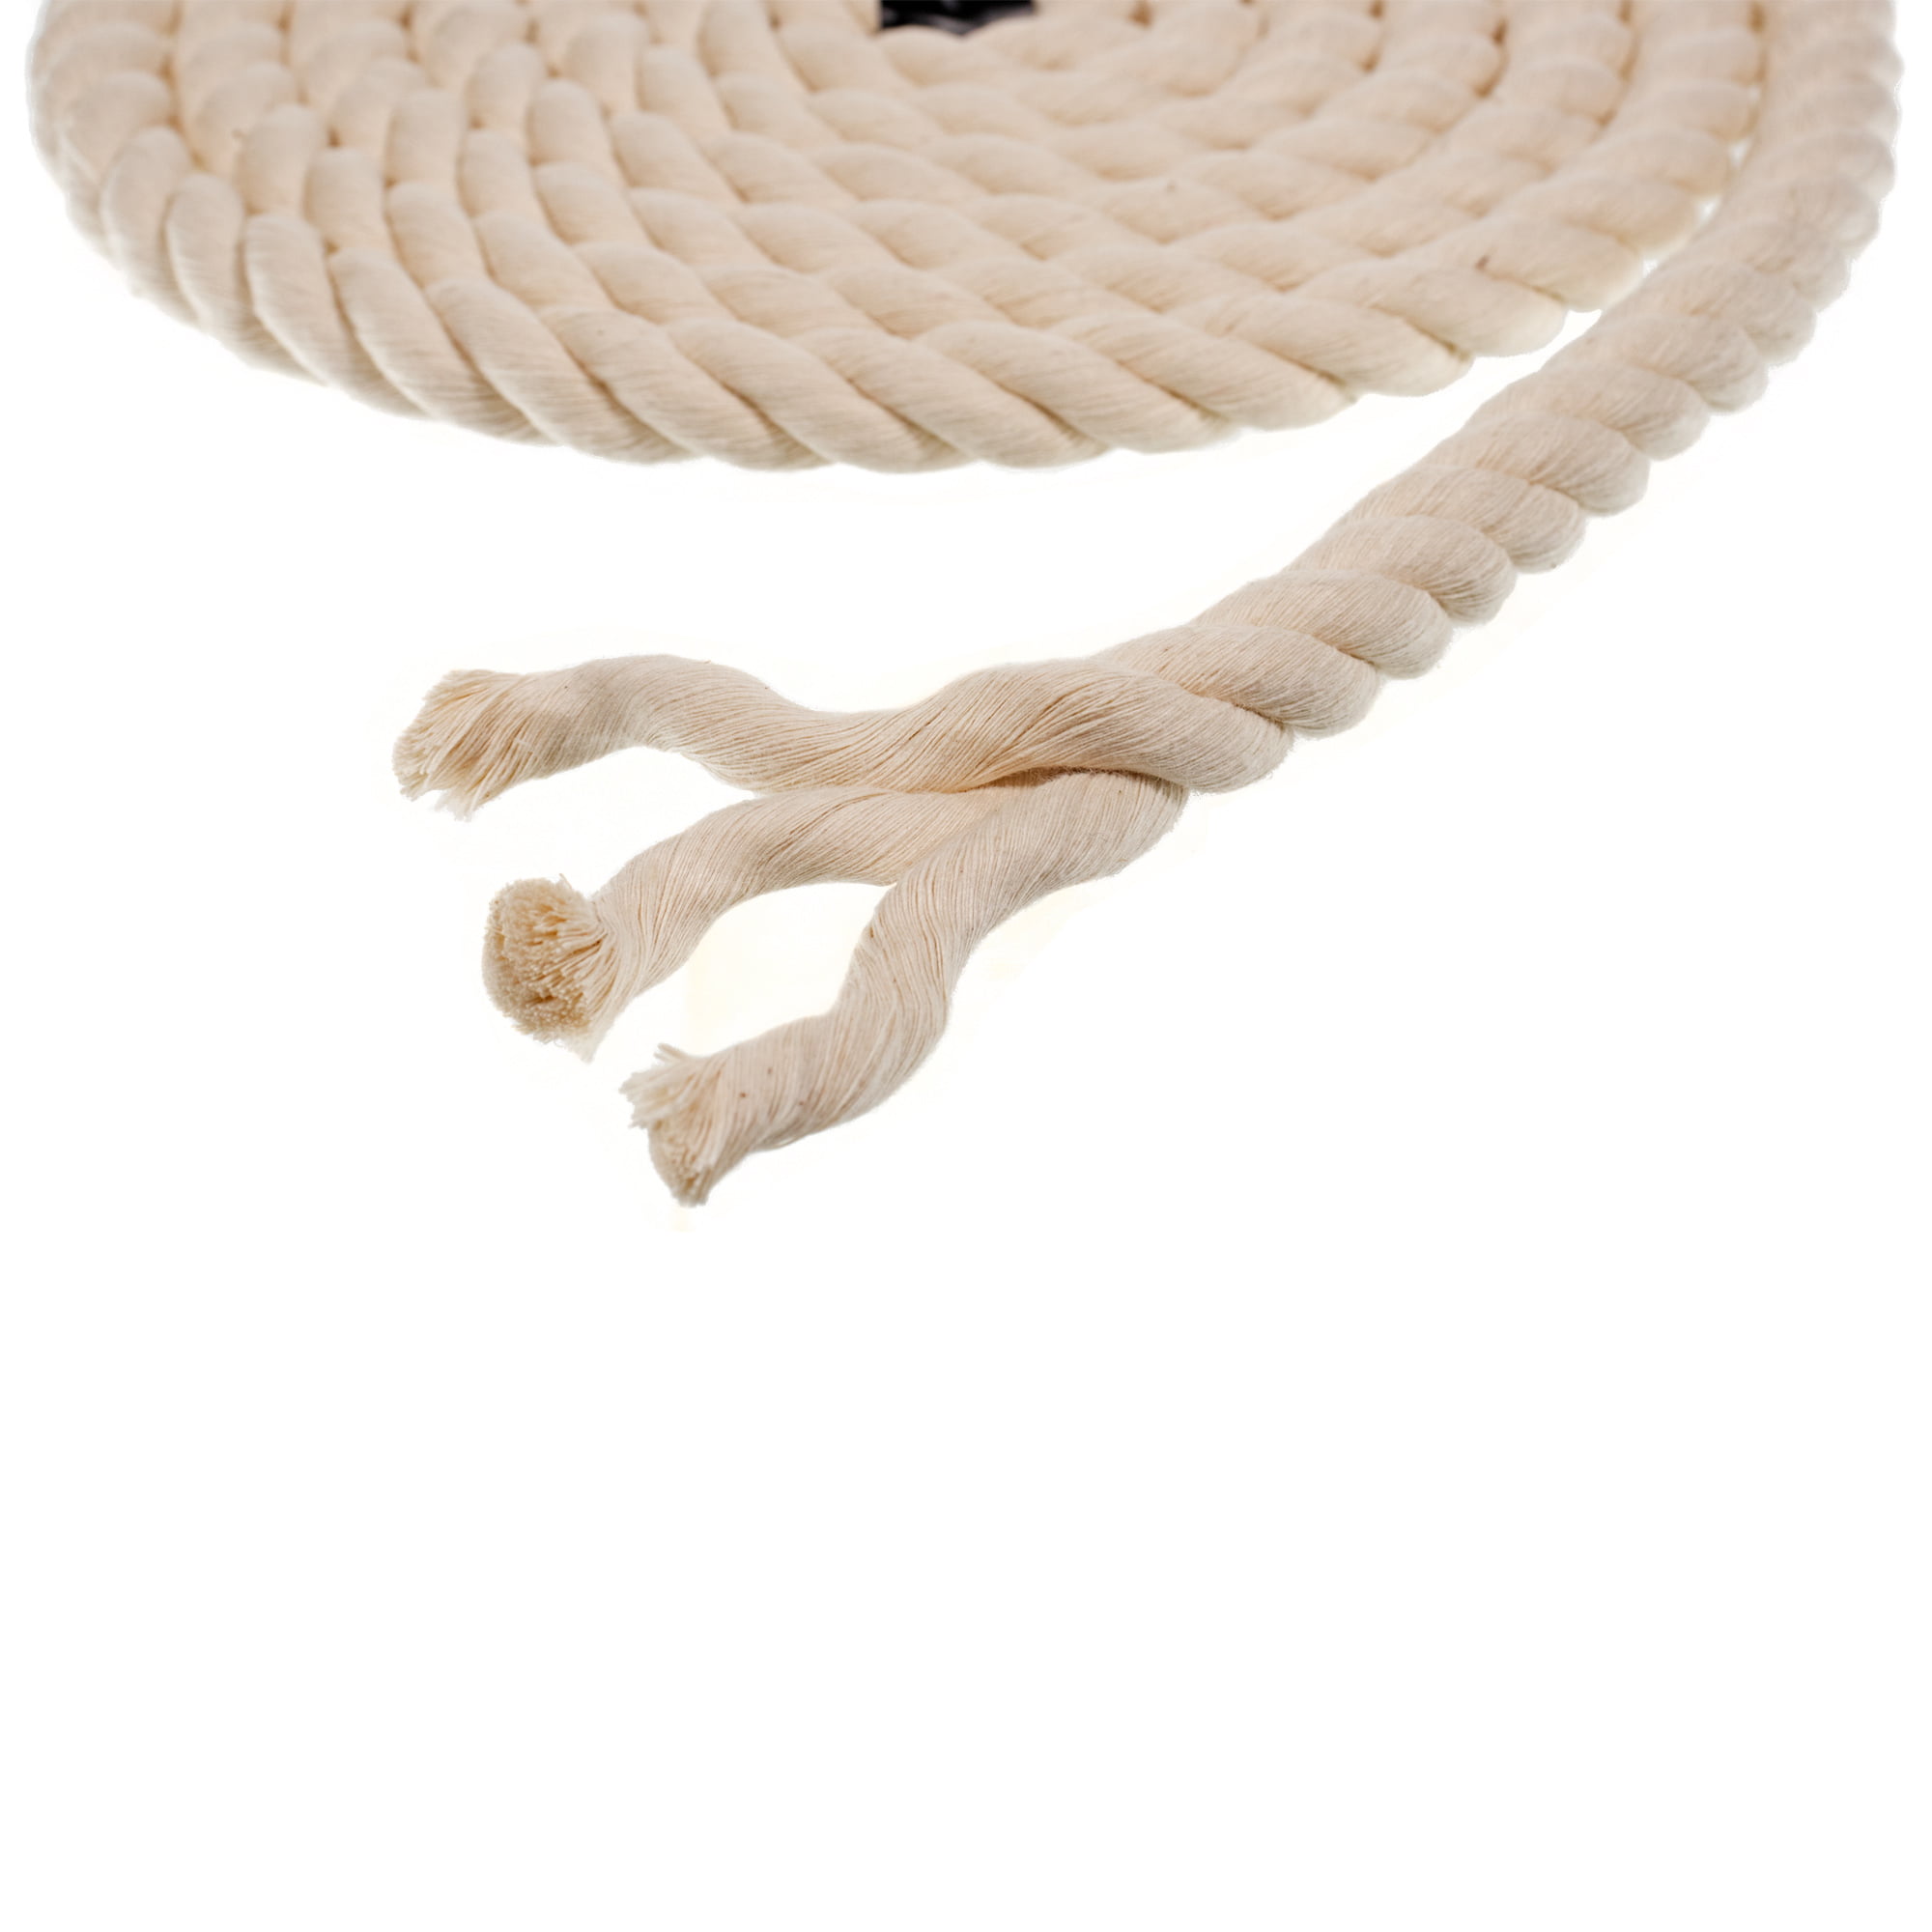 Golberg Twisted 100% Natural Cotton Rope - White Cotton Rope - (7/32 inch x 10 Feet)